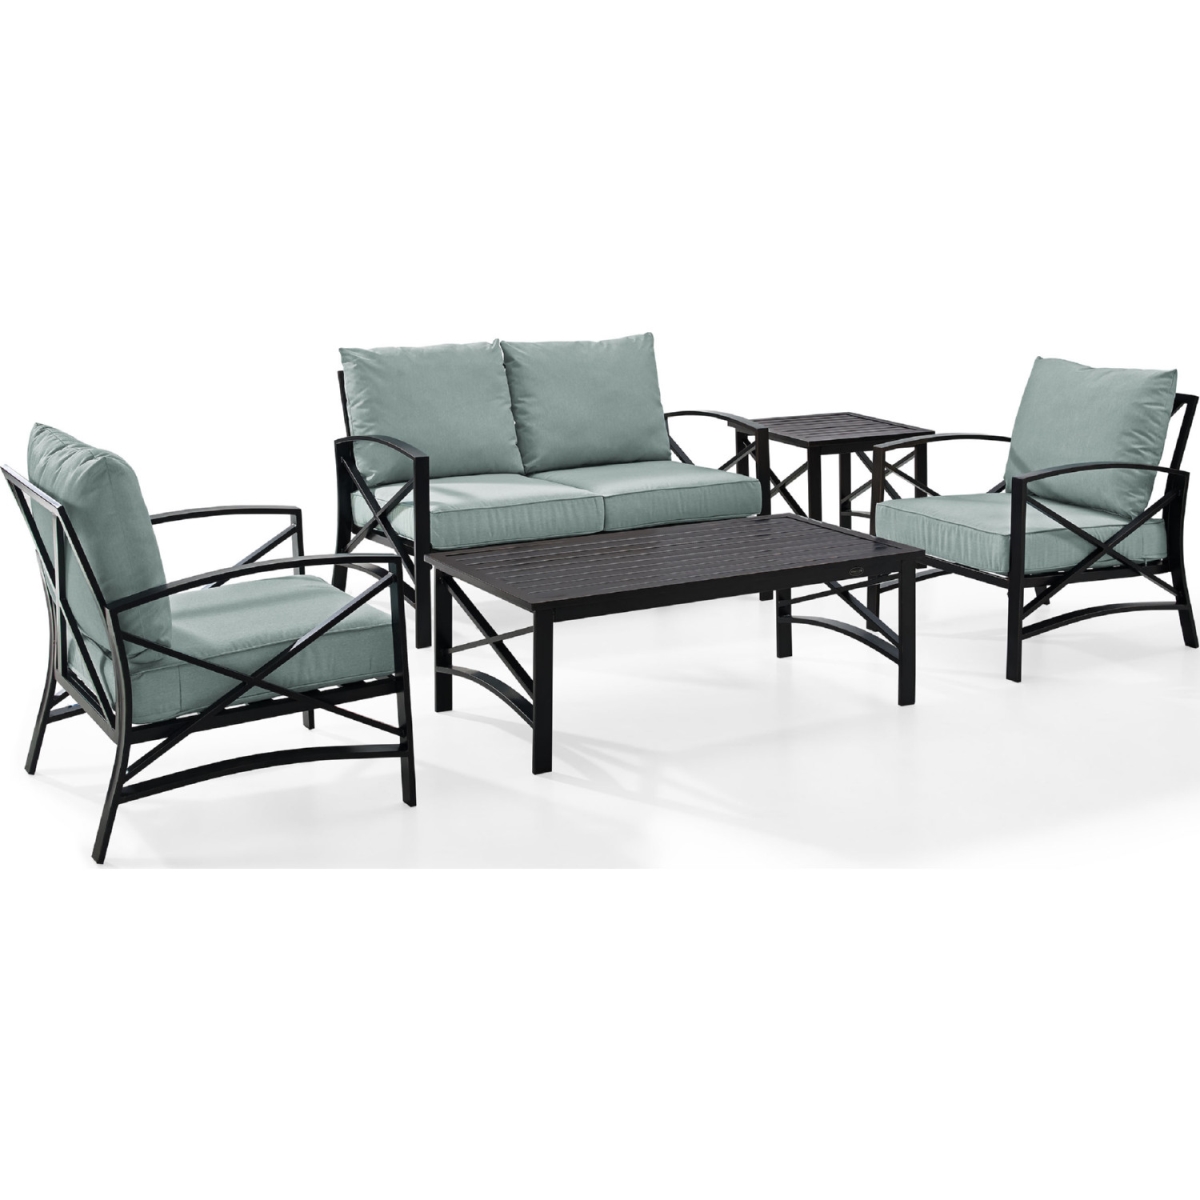 Ko60015bz-mi 5 Piece Kaplan Outdoor Seating Set With Mist Cushion - Loveseat, Two Chairs, Coffee Table, Side Table